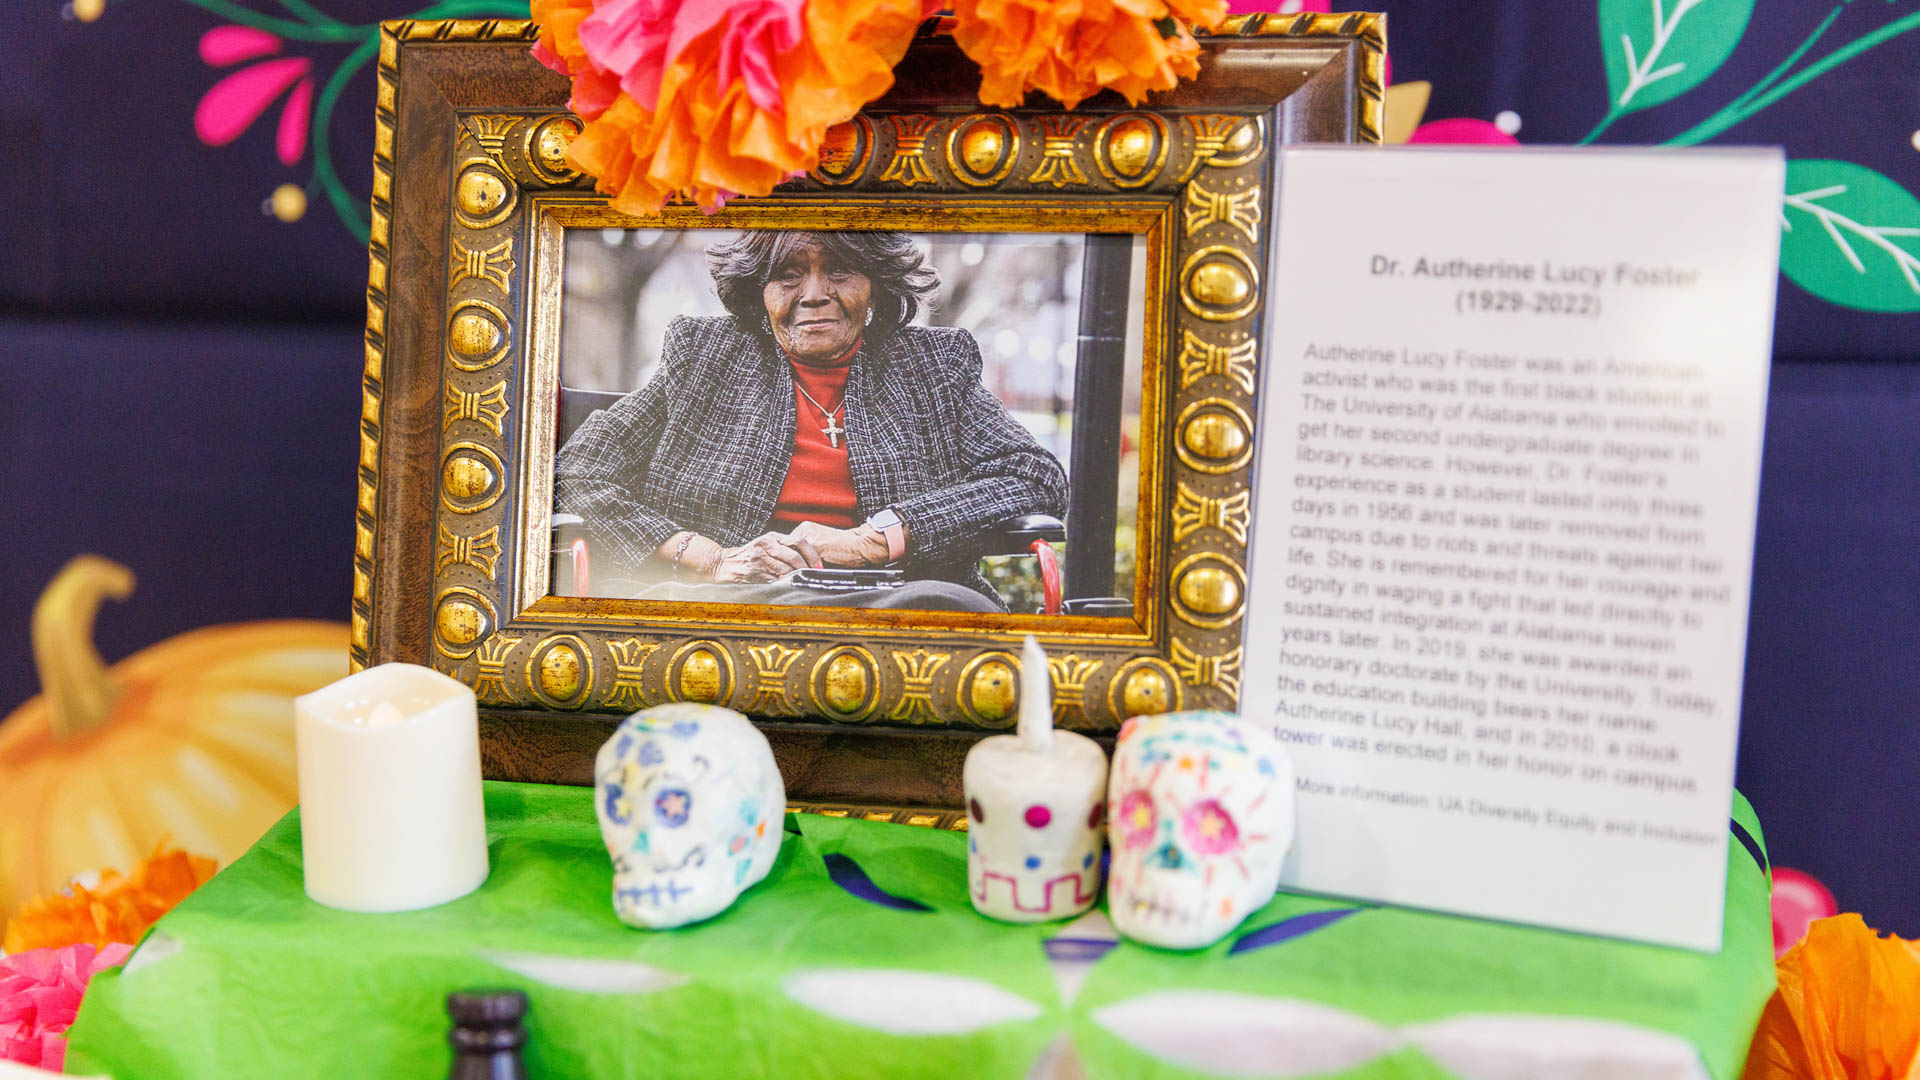 a framed photograph of Dr. Autherine Lucy foster on the dia de muertos altar